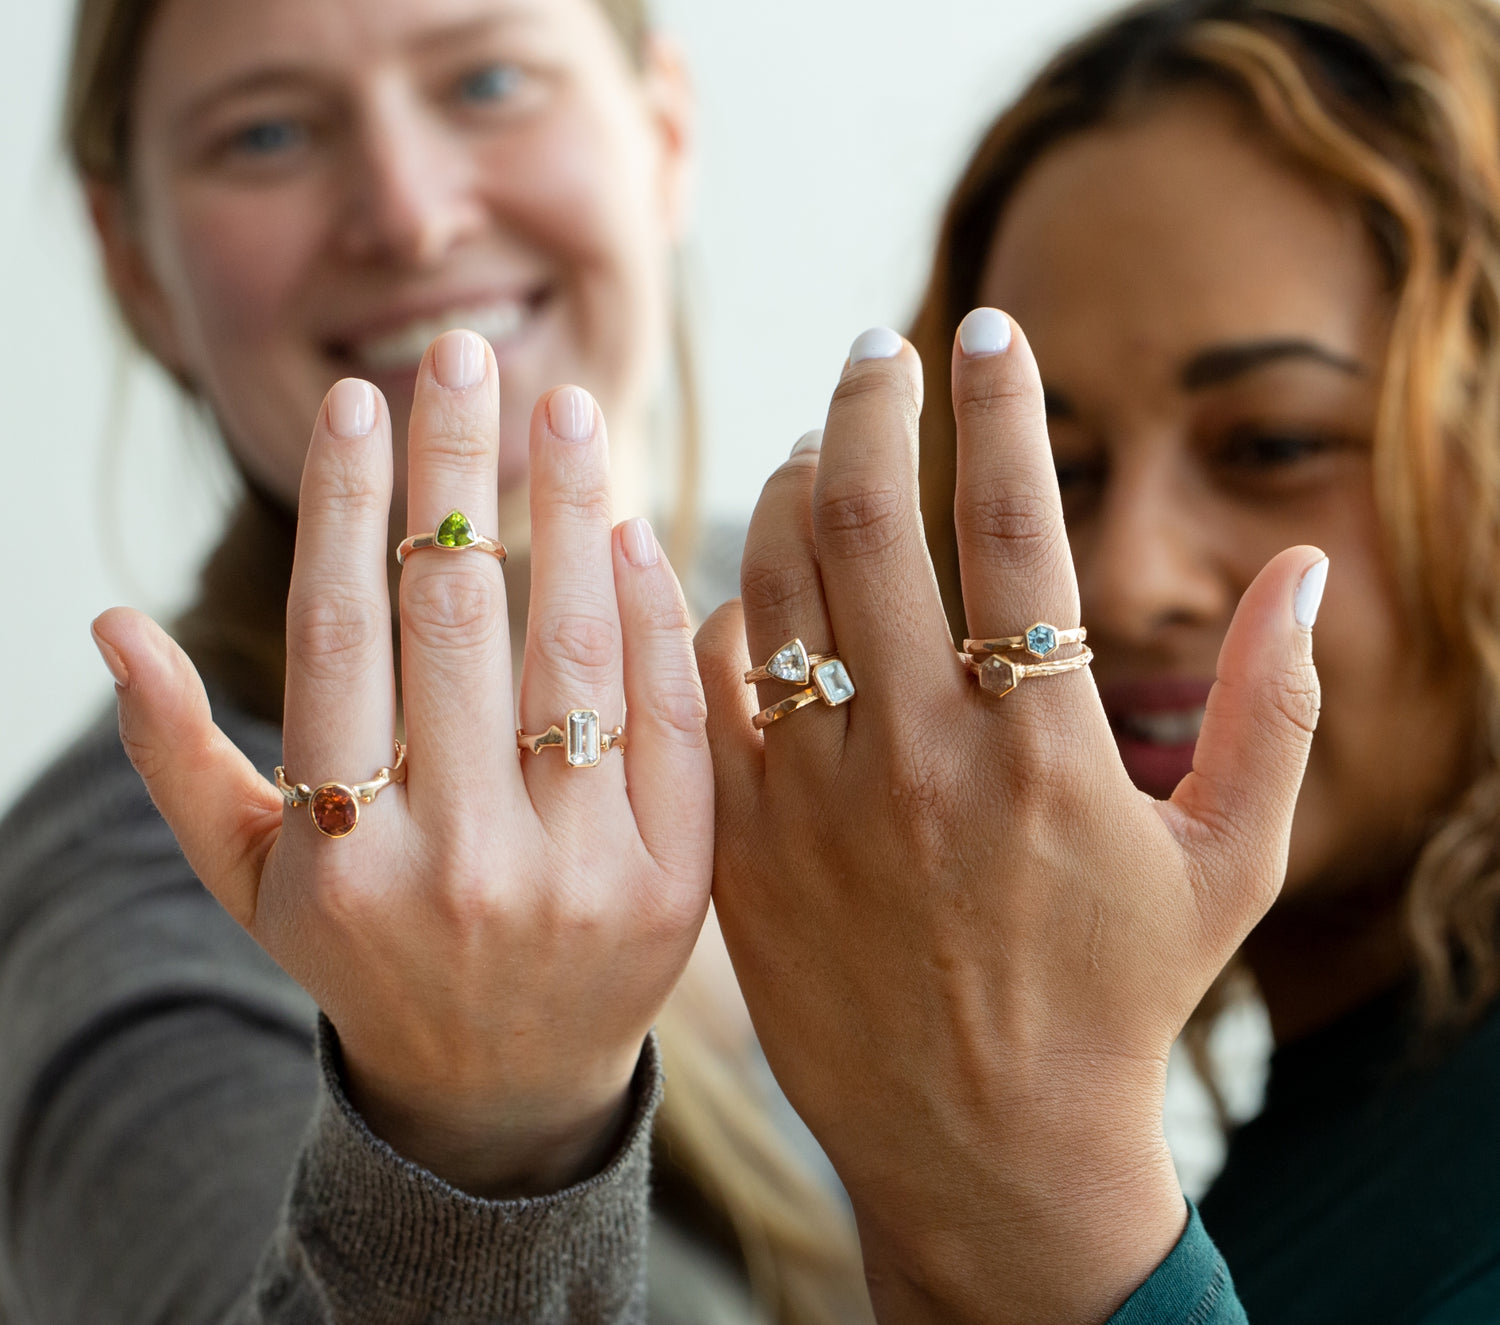 A blonde haired and brown haired woman each holding up their left hands. On their hands are various rings handcrafted by W.R. Metalarts from the Gold for Good collection which are made with 100% Fairminded gold. This gold is certifiably sourced.